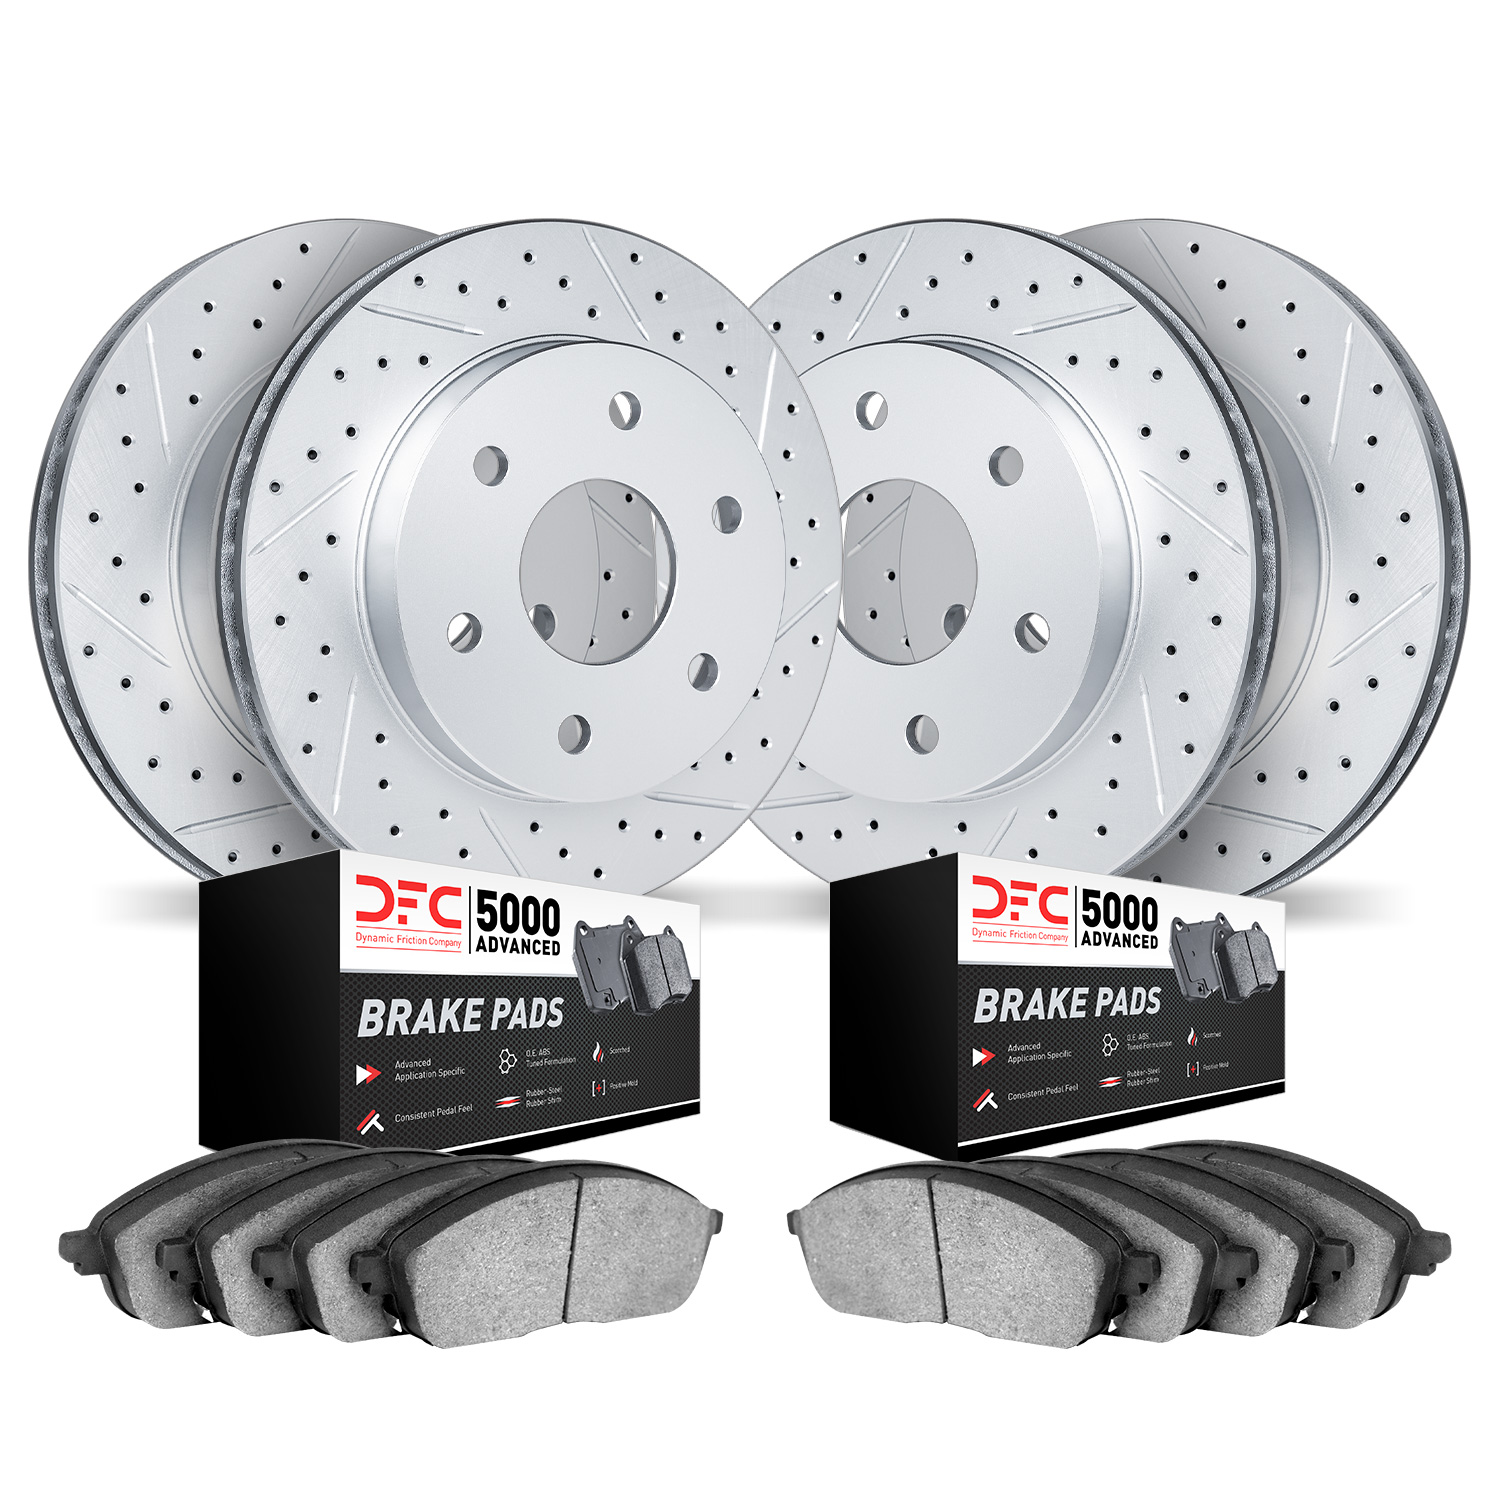 2504-48031 Geoperformance Drilled/Slotted Rotors w/5000 Advanced Brake Pads Kit, 2002-2005 GM, Position: Front and Rear